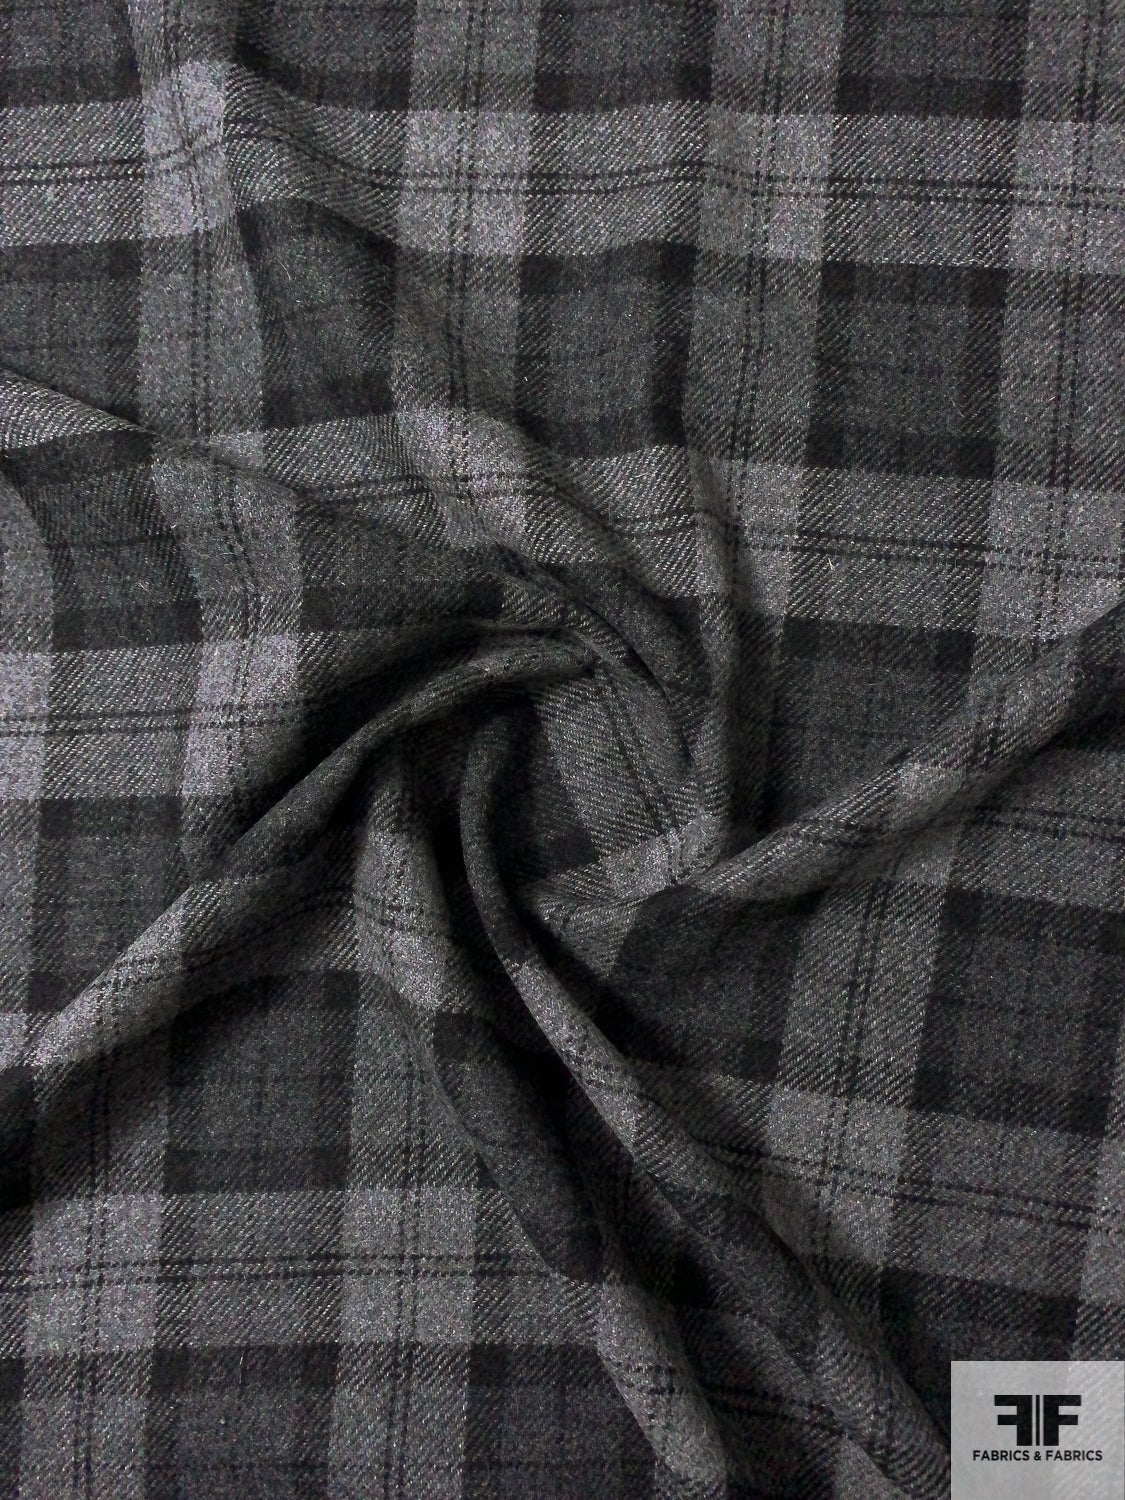 Mammoth Flannel Grey Gray Plaid Checks Woven Double Sided Flannel Fabric By  the Yard (SRKF-19670-188-pepper)